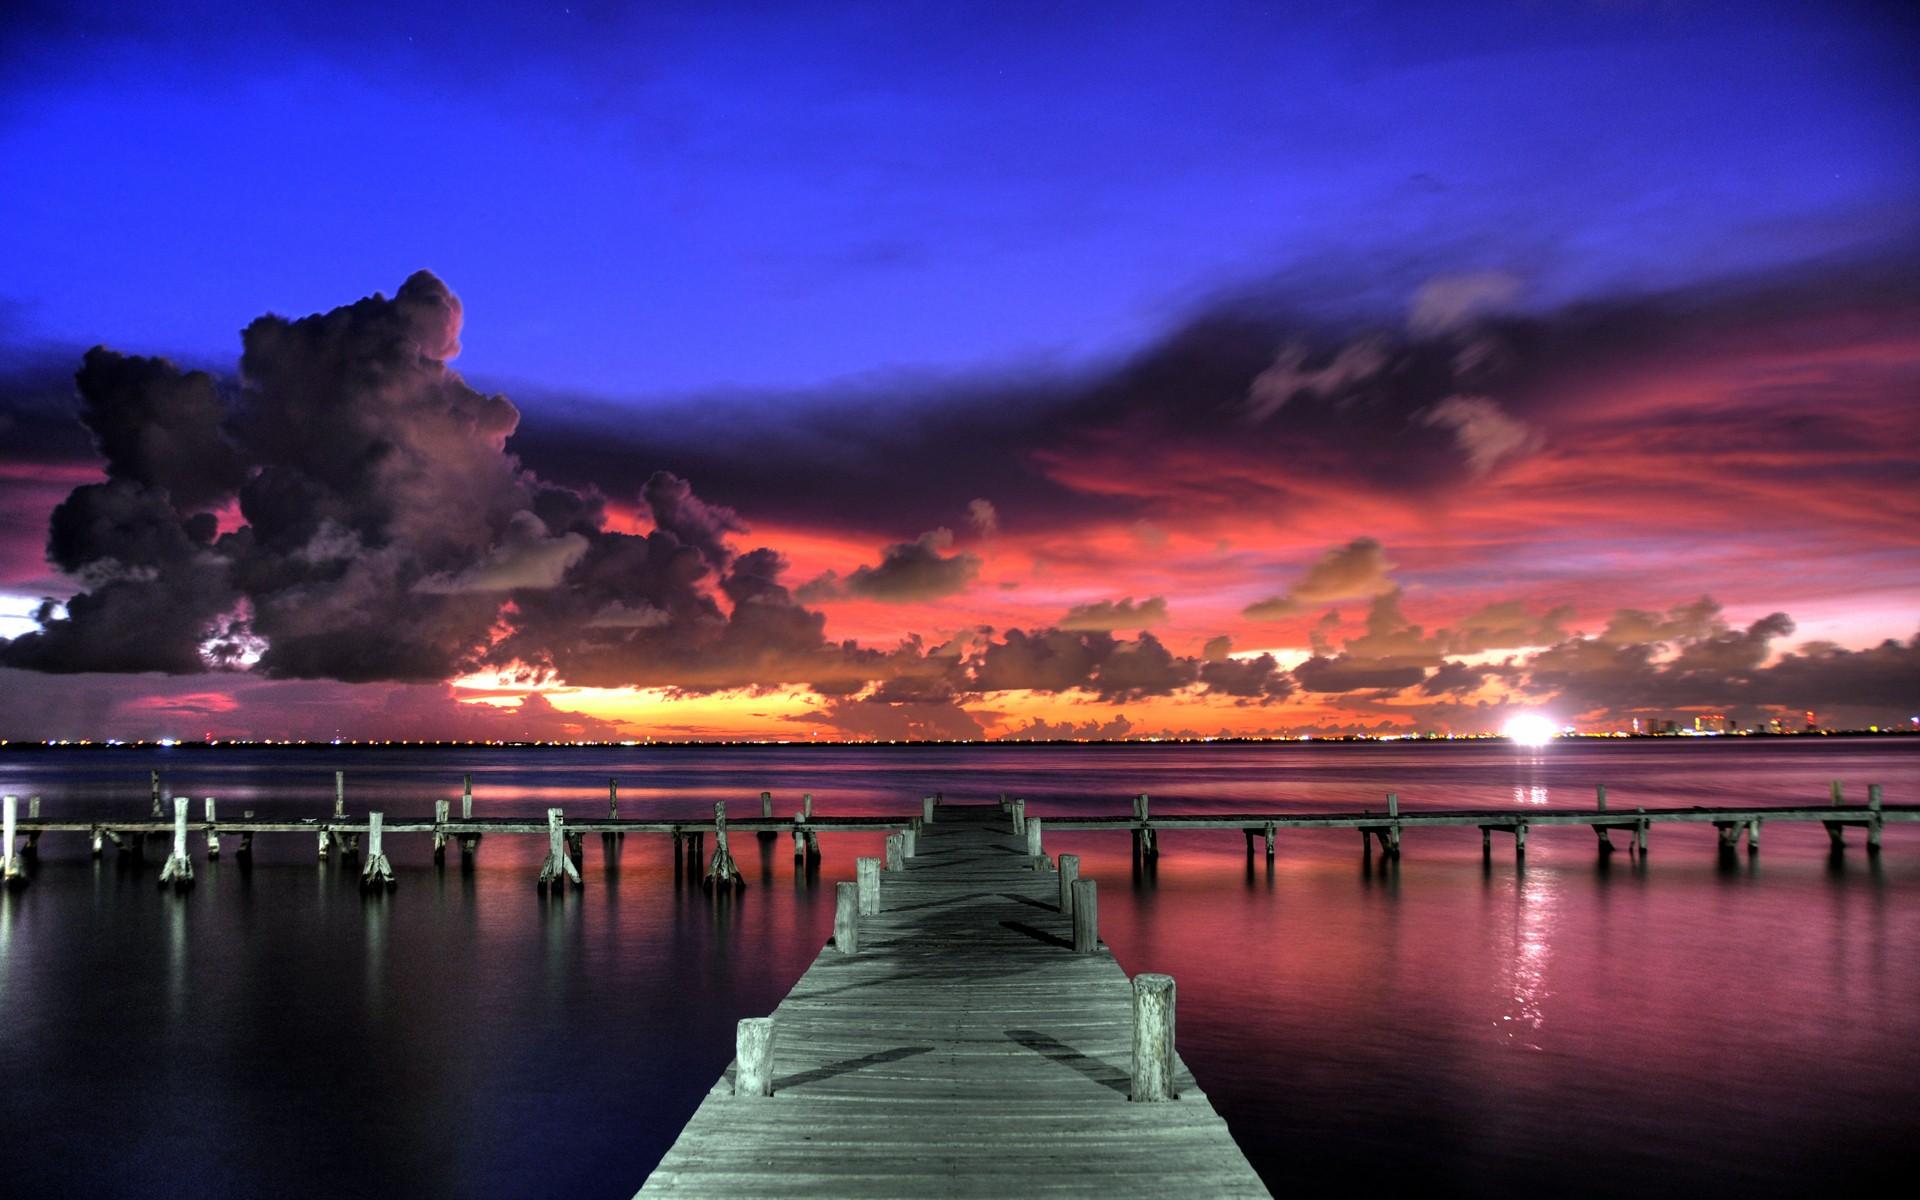 Dusk Gallery of Wallpaper. Free Download For Android, Desktop